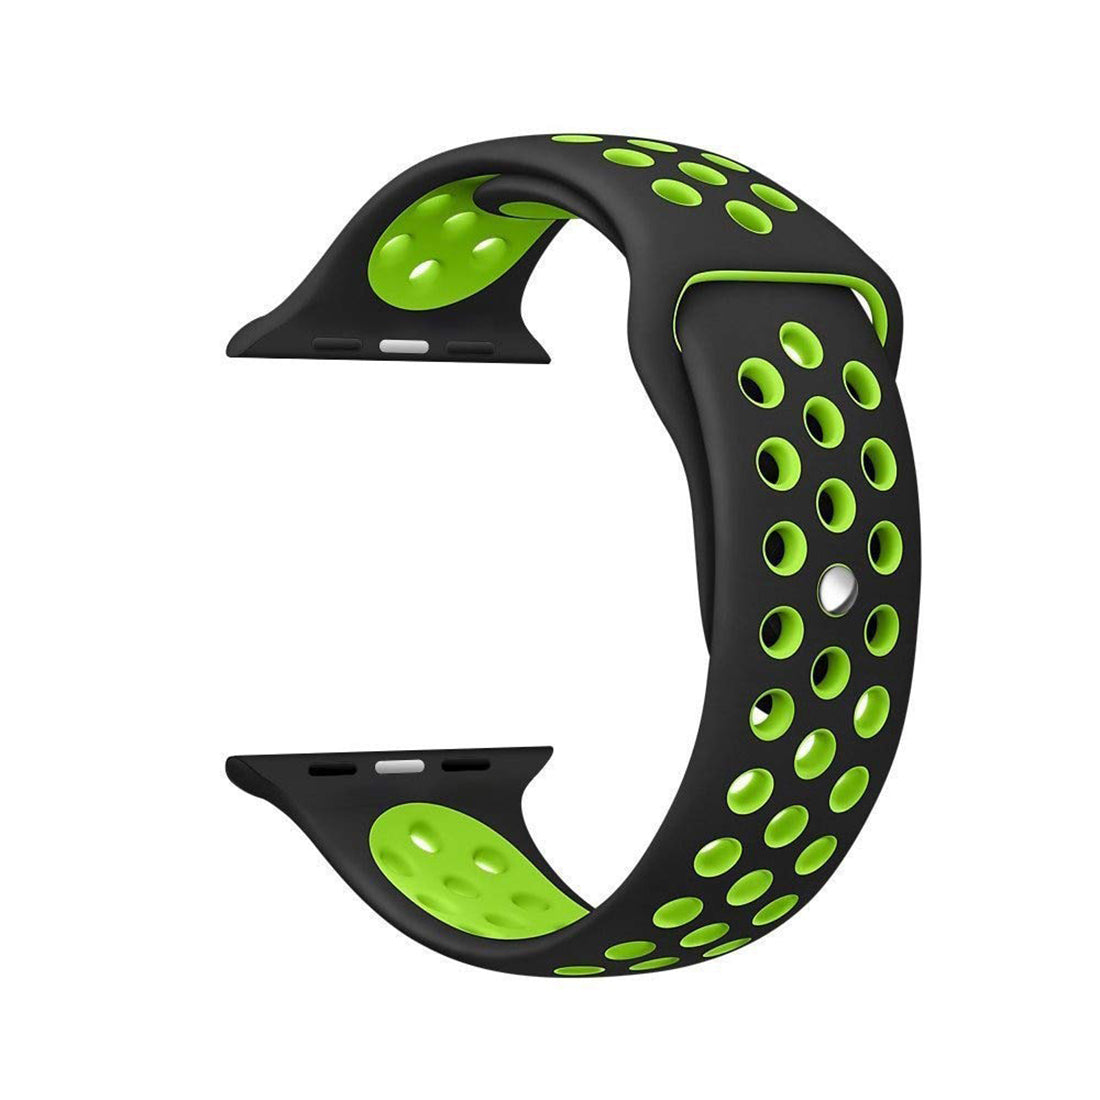 Silicone Sports Watch Strap for Apple Watch Series 5/4/3/2/1 (Black & Green Air Hole)